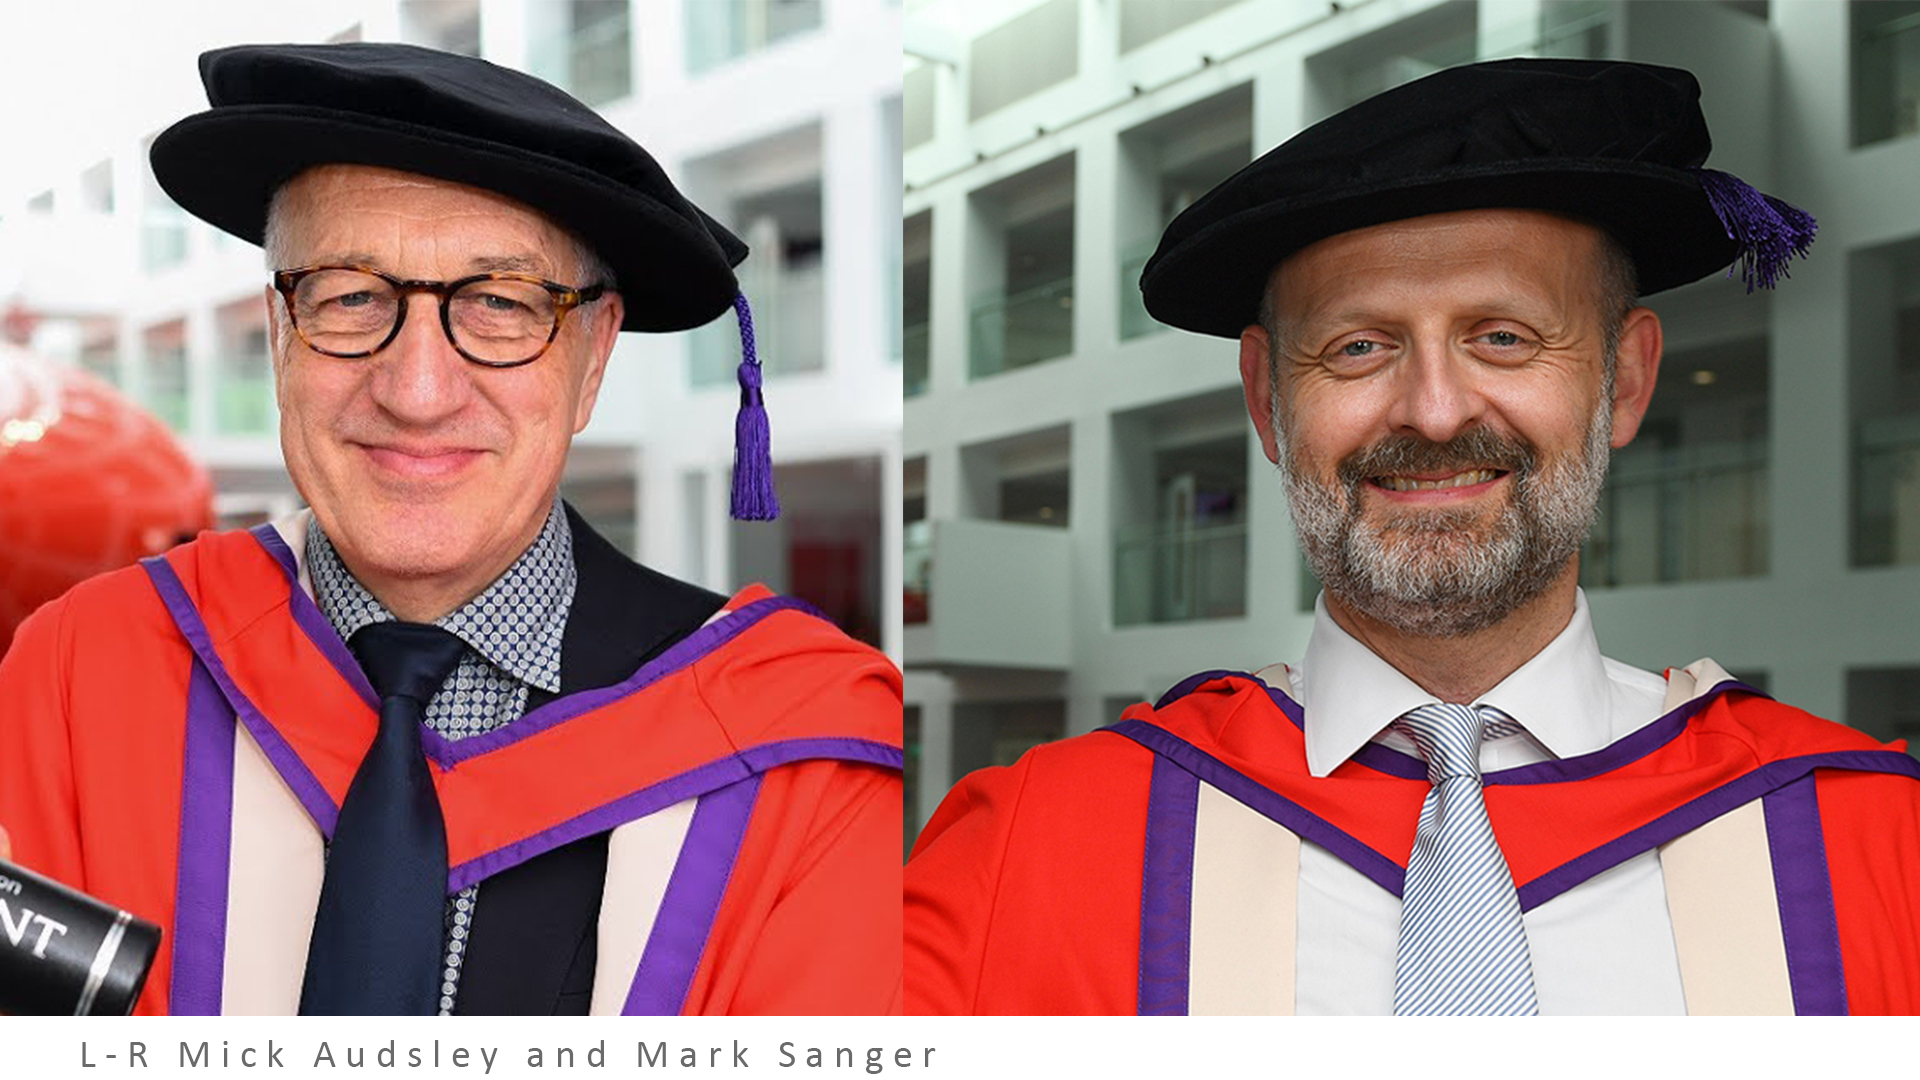 Picture of Mick Audsley (left) and Mark Sanger (right) receiving their Honorary Doctorate awards at Solent University